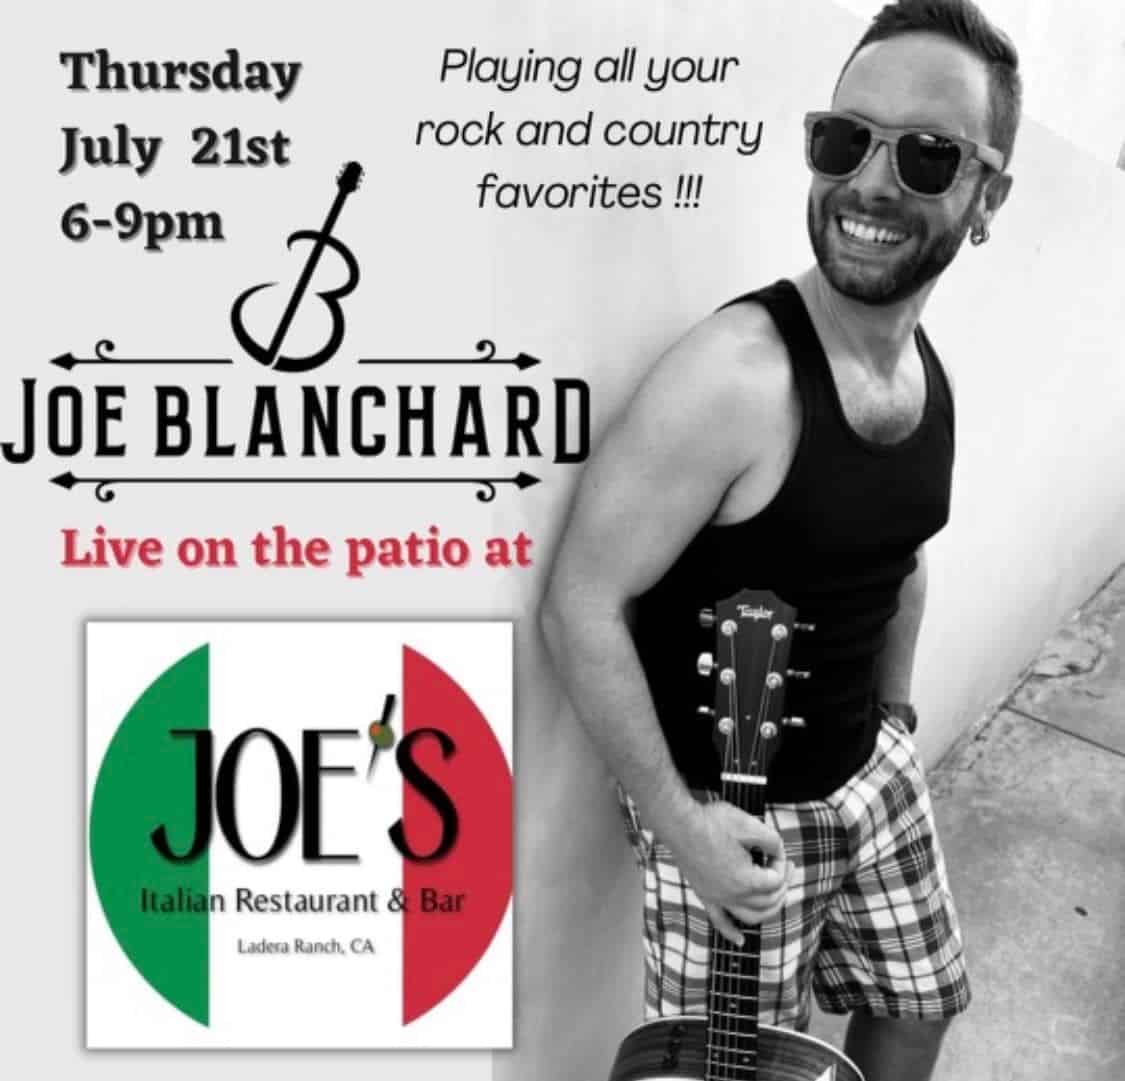 Joey Blanchard on the patio 6:00 to 9:00 PM (7/21/22)